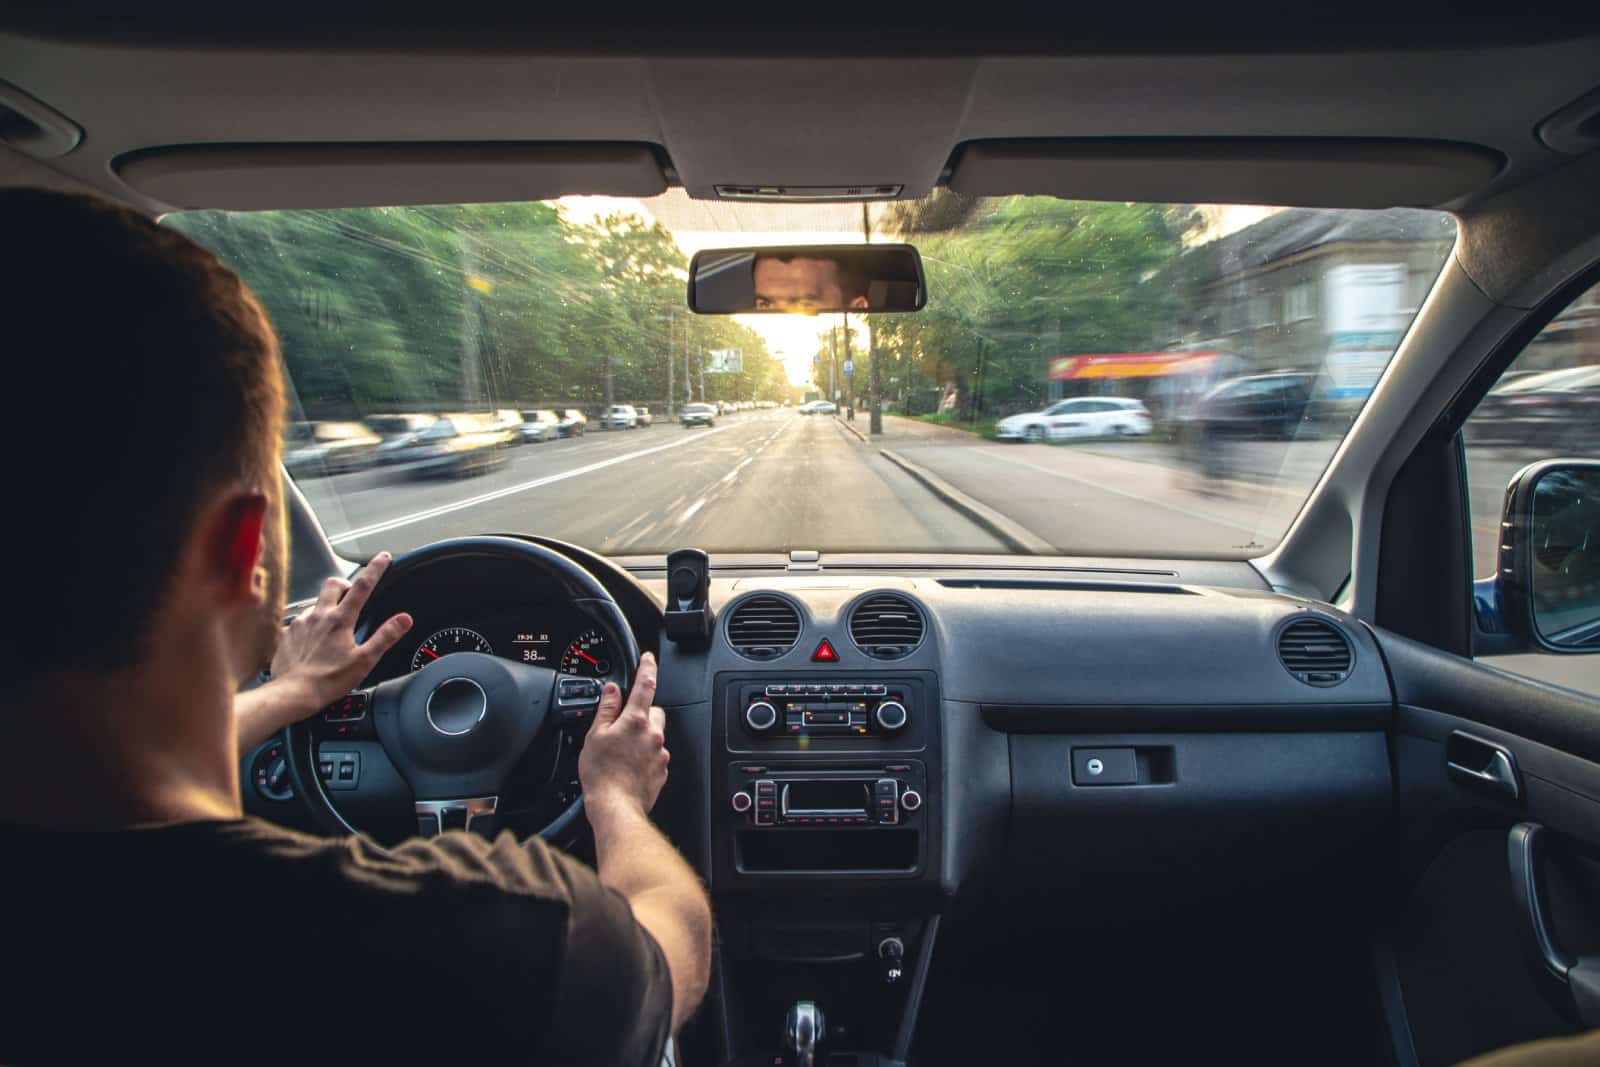 <p class="wp-caption-text">Image Credit: Shutterstock / PV productions</p>  <p>In many parts of the USA, owning a car is a necessity, leading to sprawling suburbs and extensive highway systems that can be overwhelming for tourists reliant on public transportation.</p>